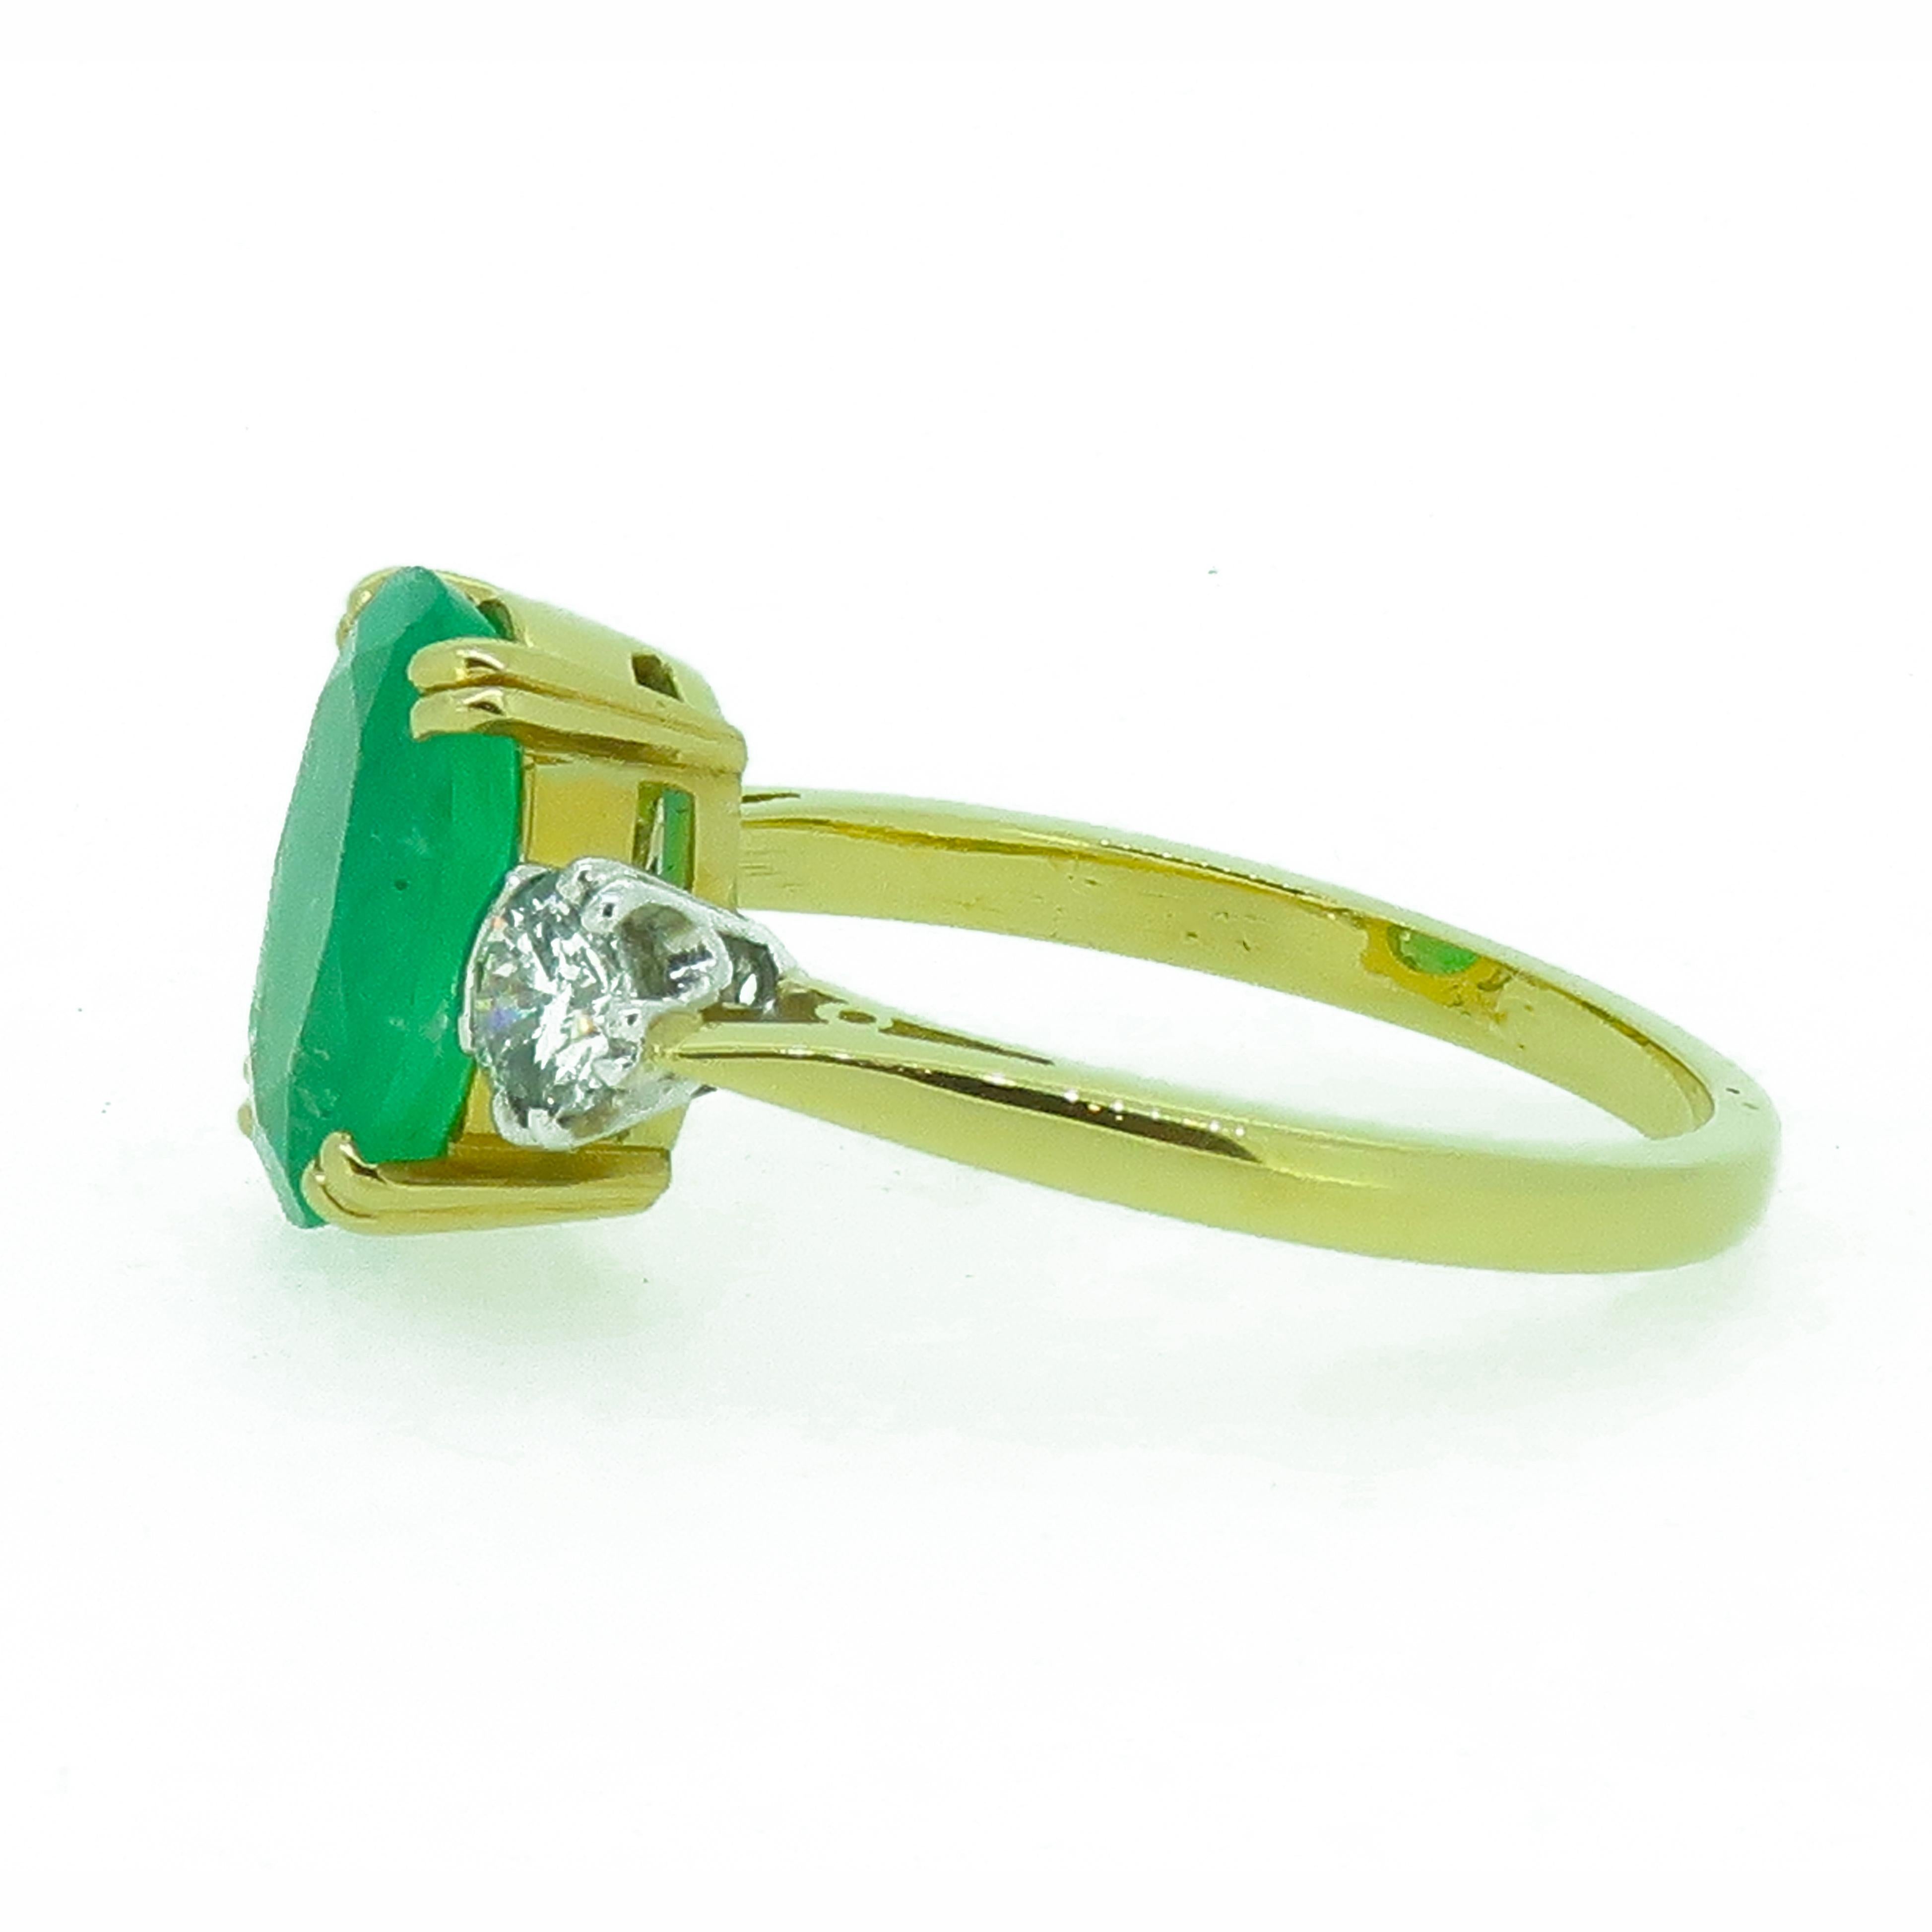 Oval Emerald and Diamond Three-Stone Ring 18 Karat Yellow and White Gold

A vibrant oval emerald & diamond 3 stone ring. Central oval emerald is a lovely vibrant bright green colour with some natural inclusions within the stone, set in four 18 carat